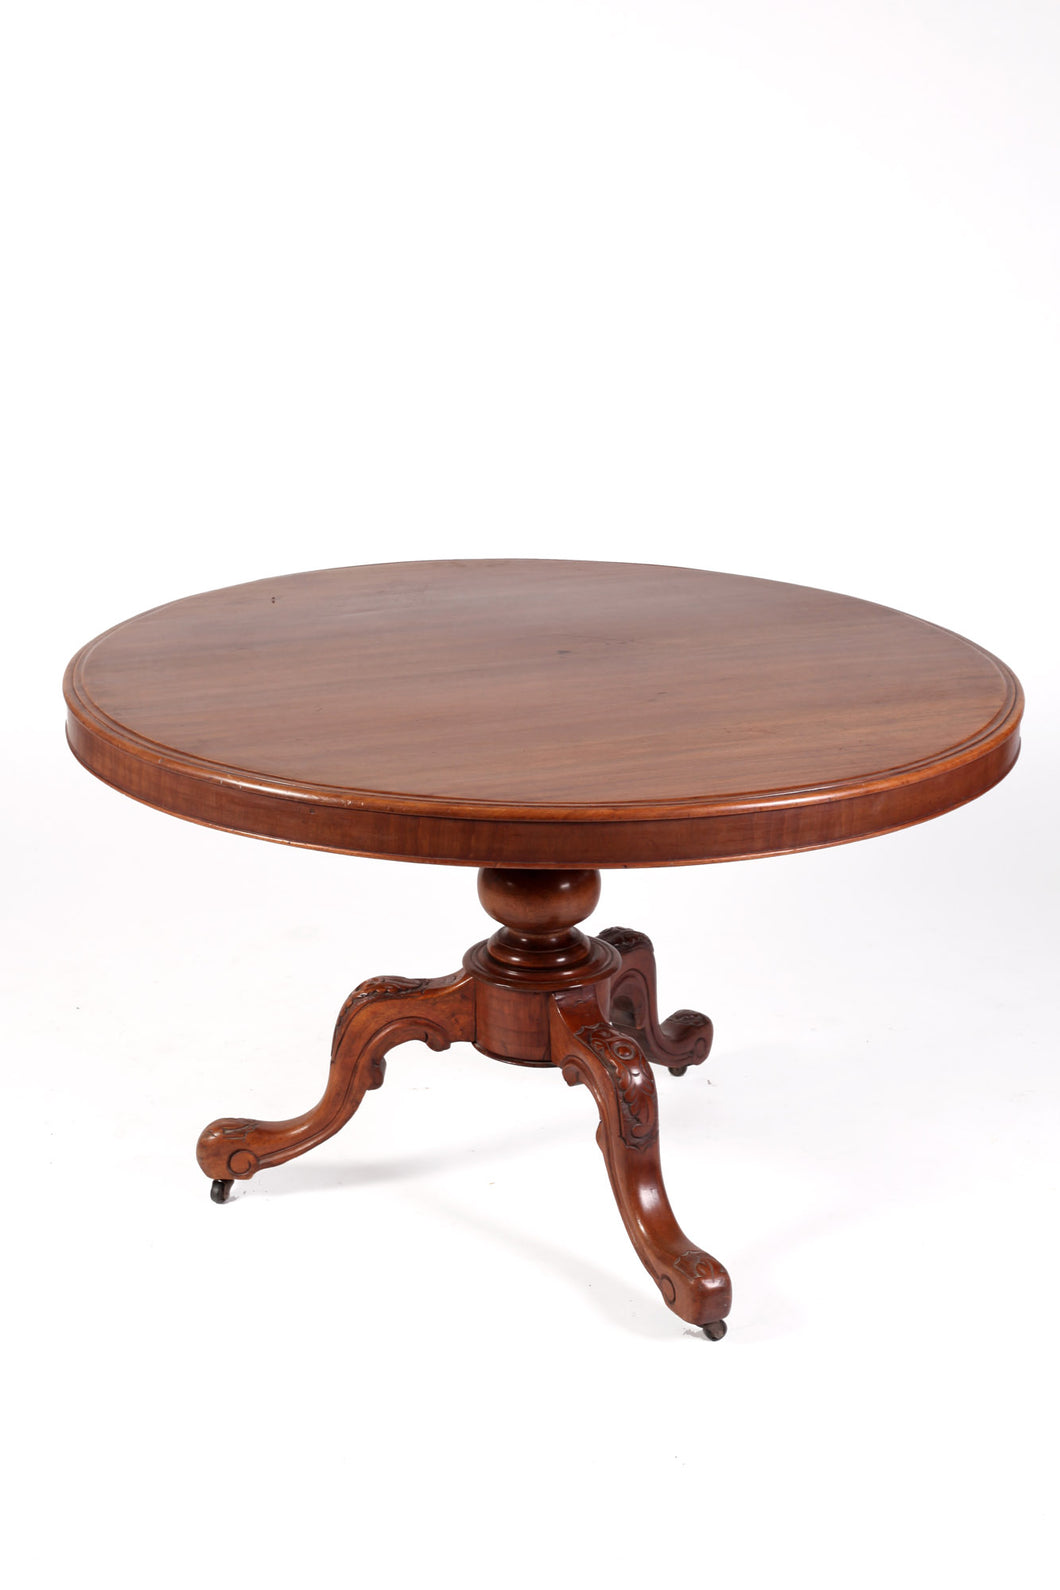 Antique Wooden Round Table